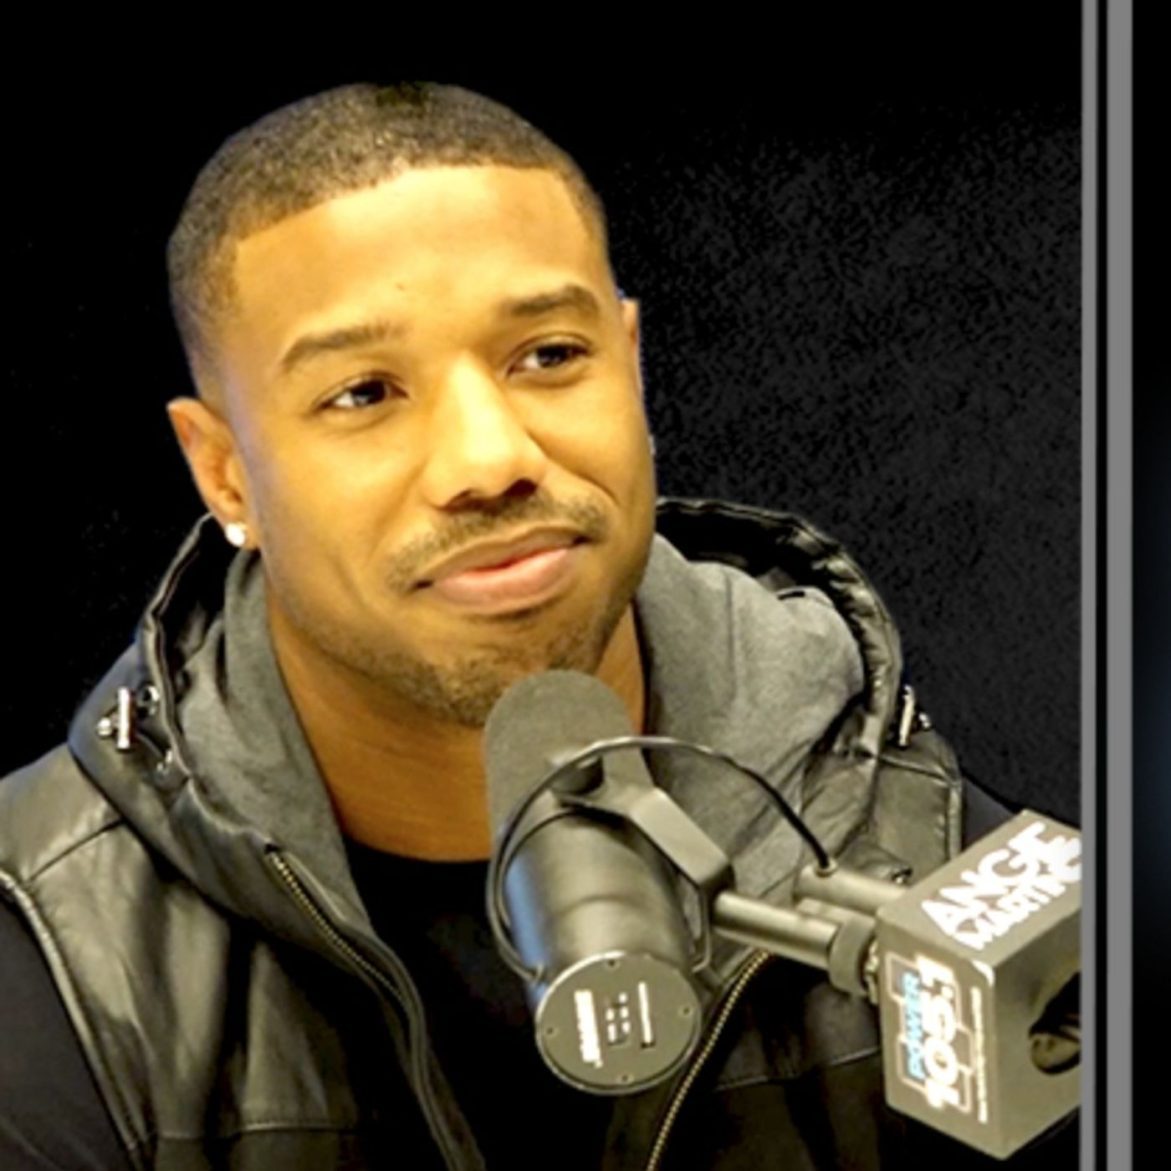 Black Podcasting - Michael B. Jordan On 'Black Panther' "It Will Empower Our Kids"